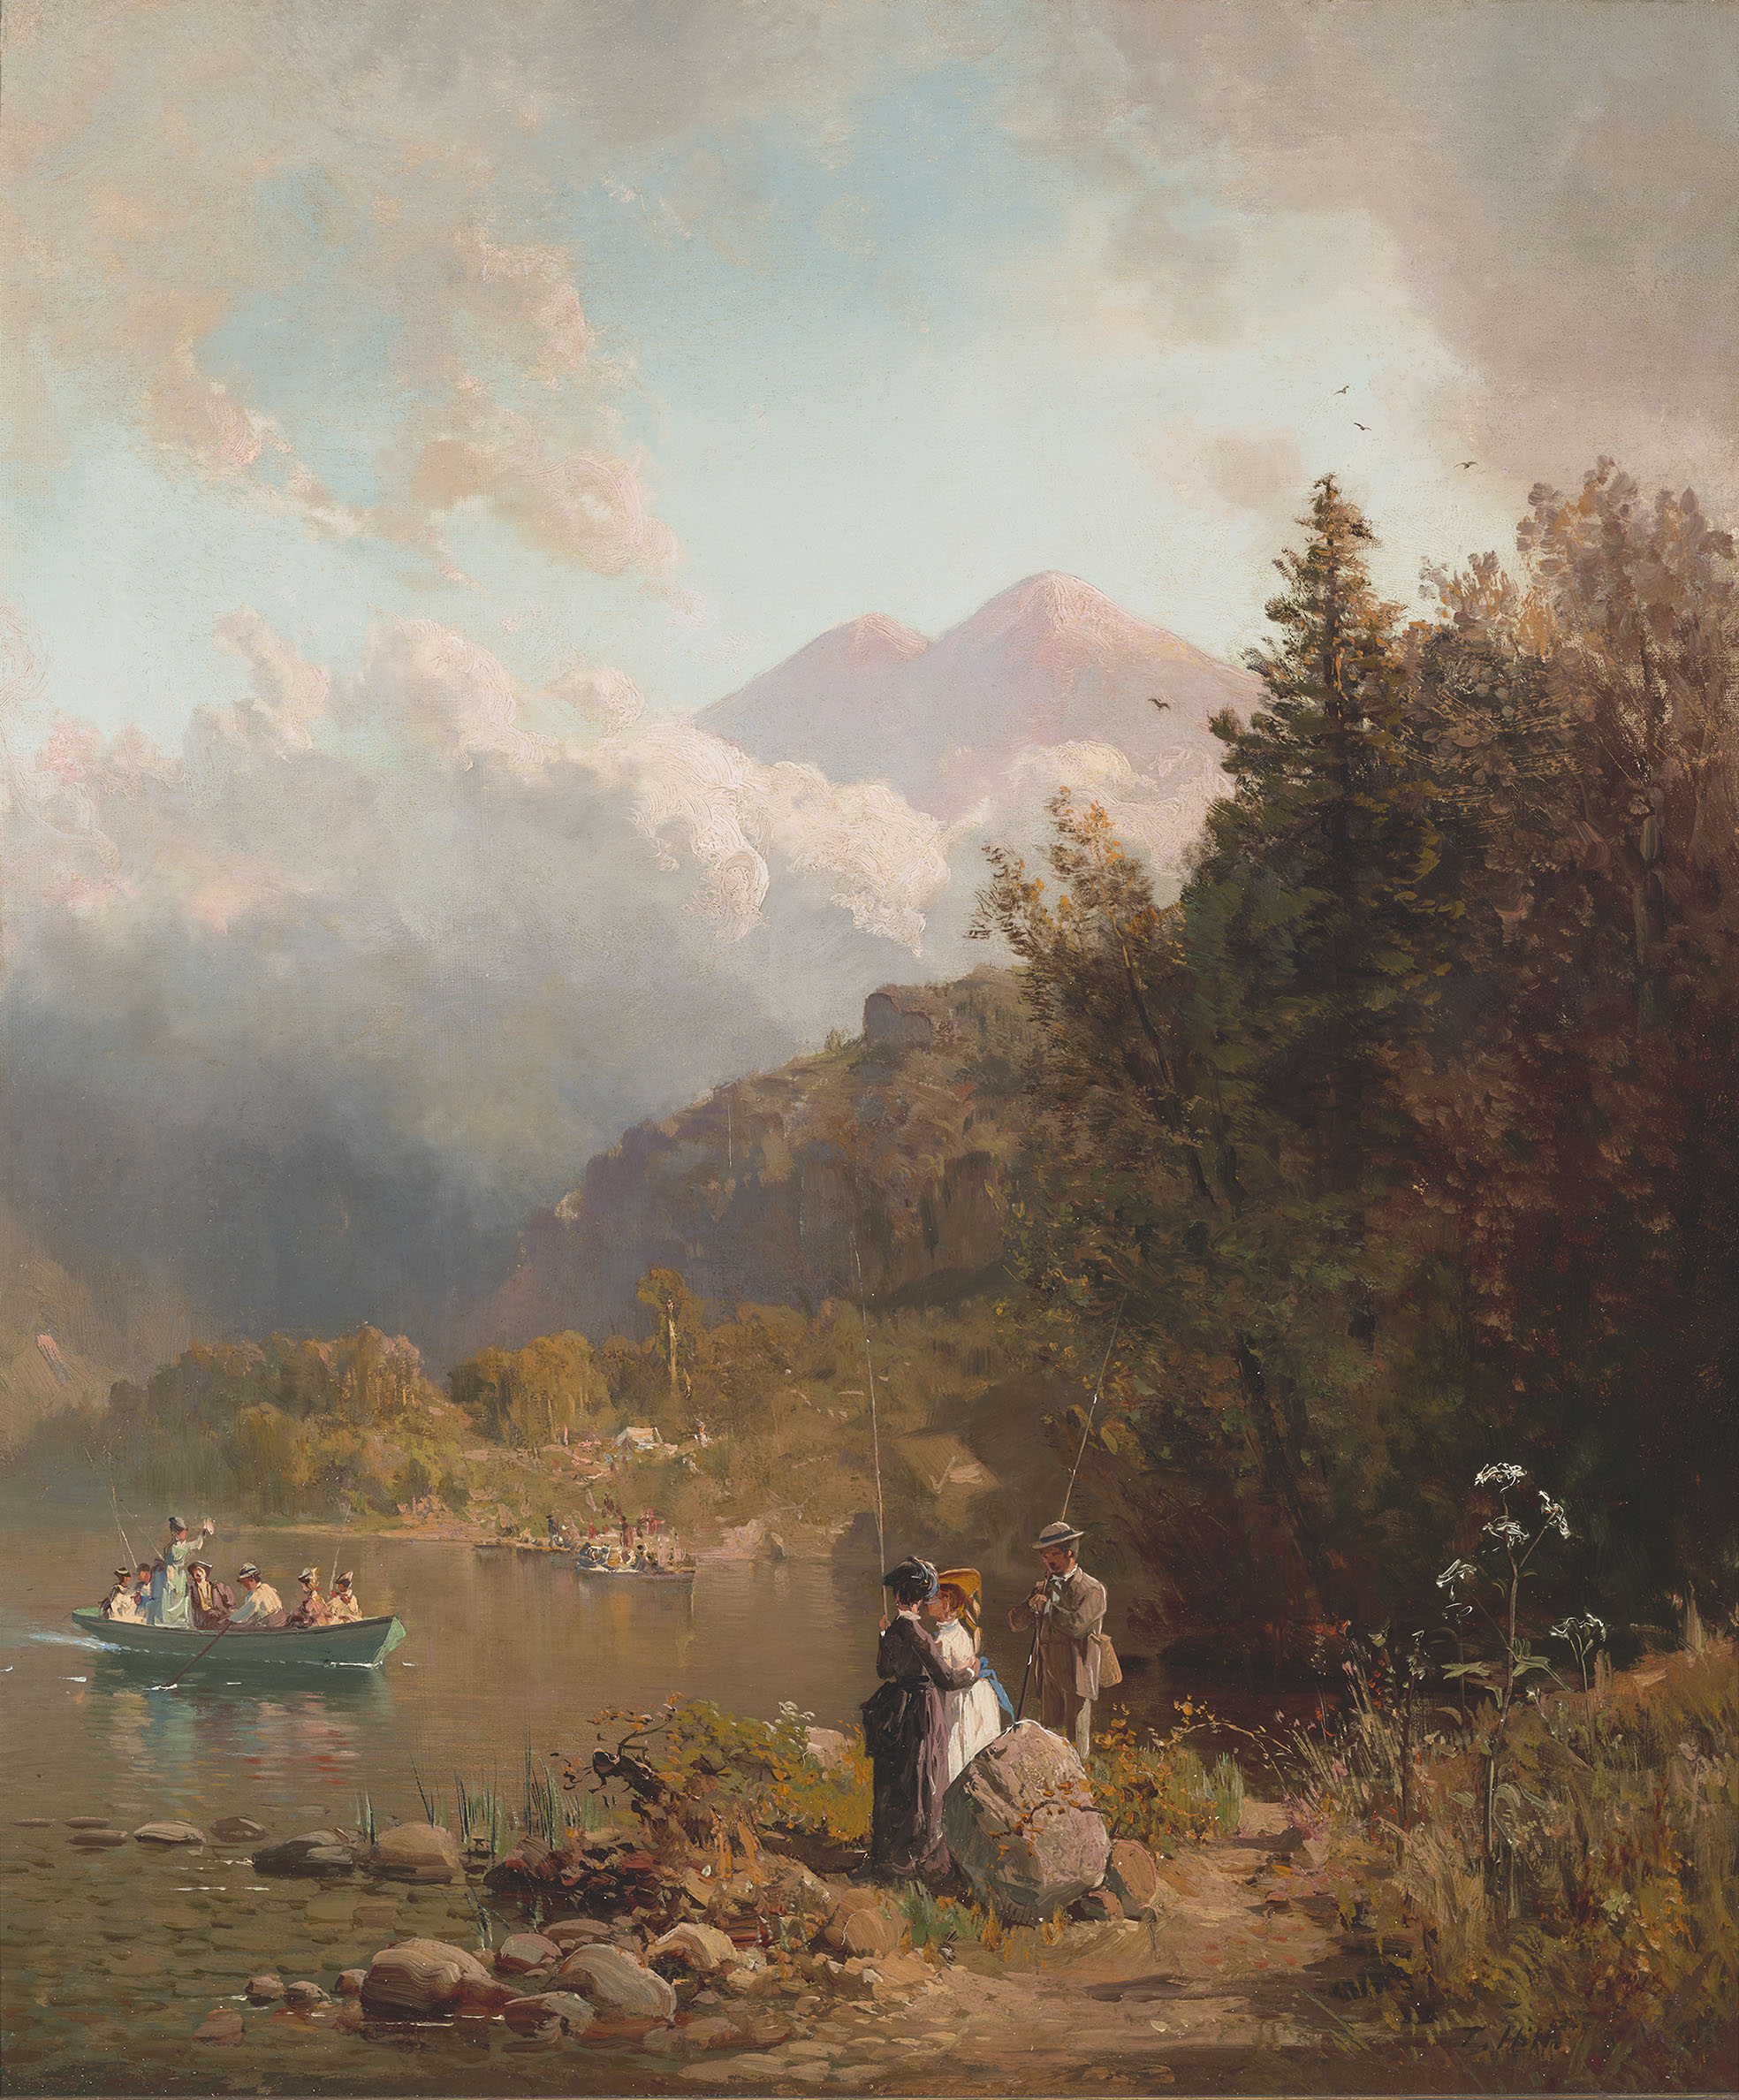 Fishing Party in the Mountains by Thomas Hill